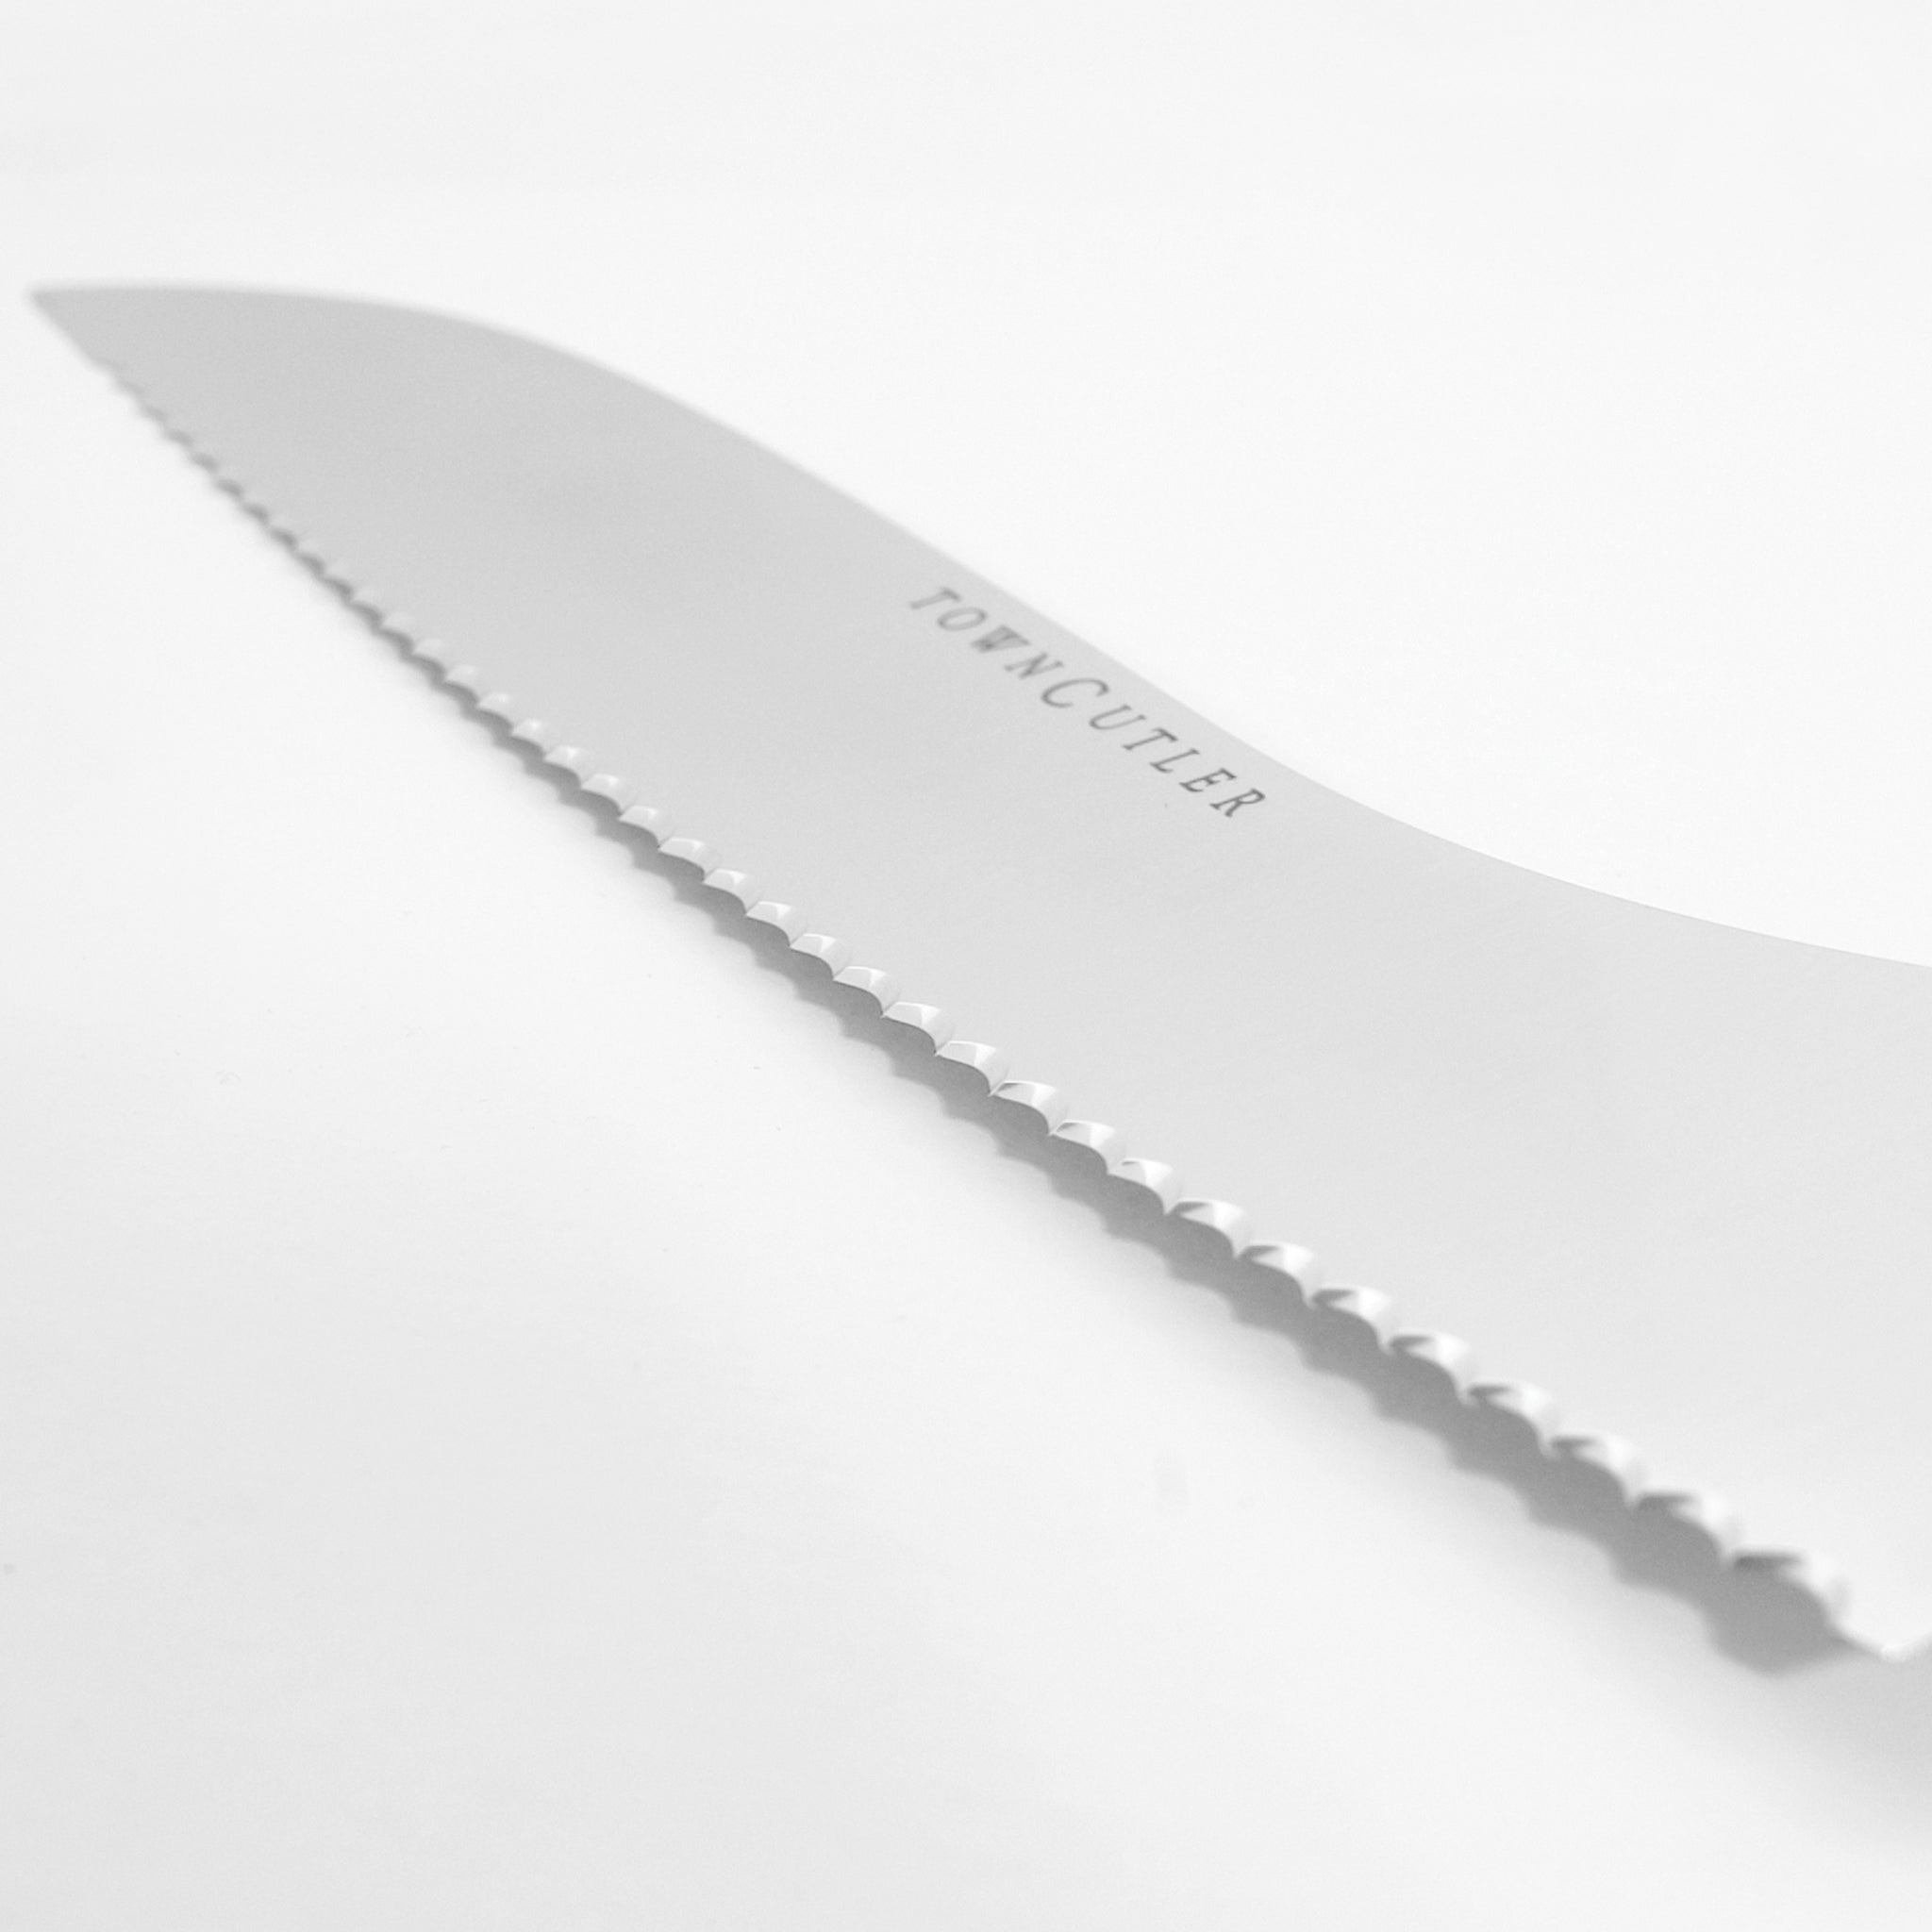 Town Cutler bread knives are the only serrated knives we carry. They are serrated by hand to ensure quality.